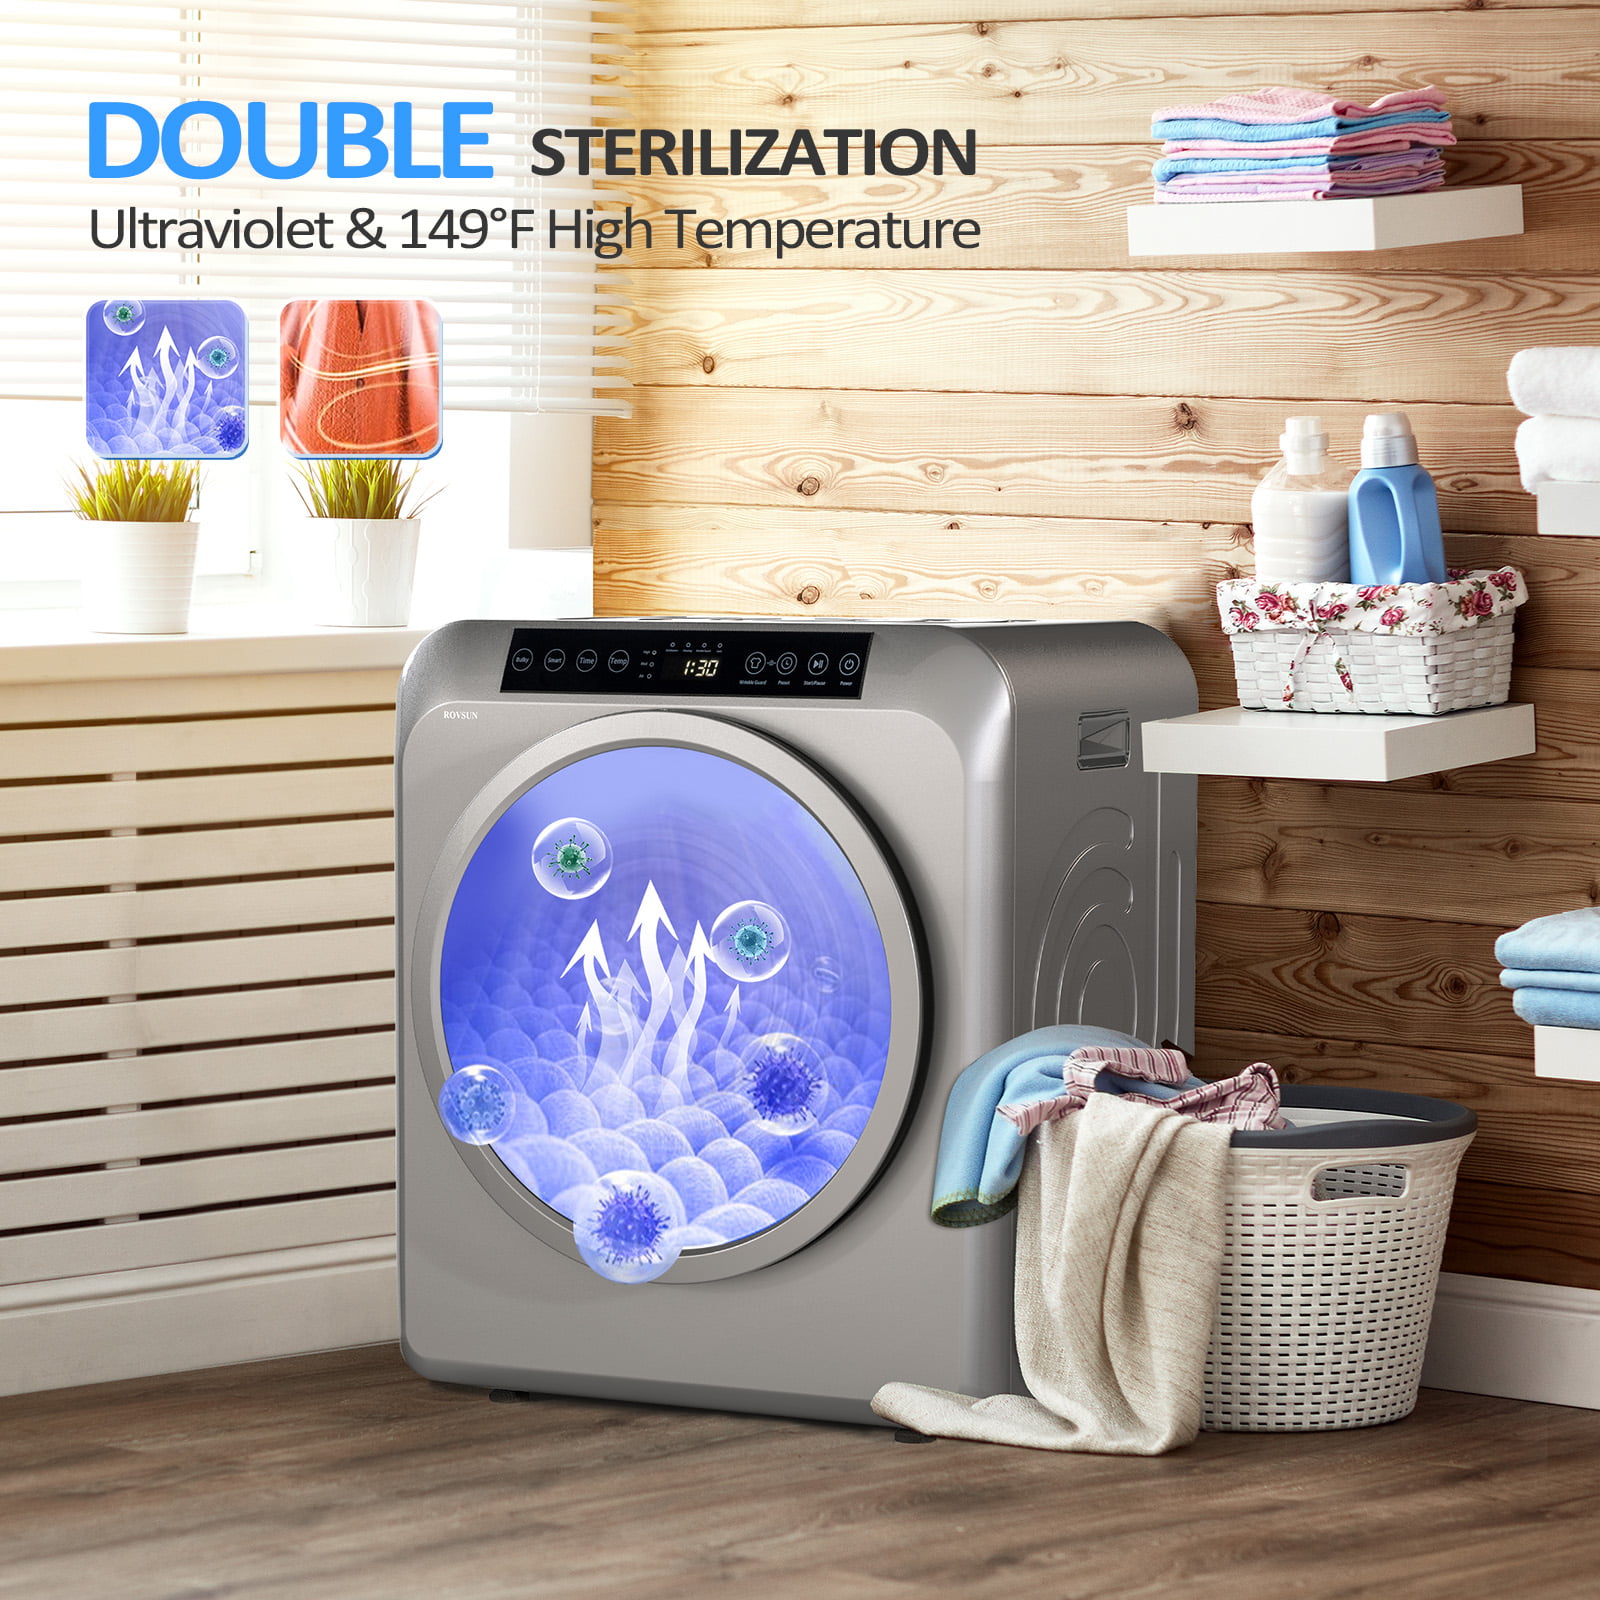 ROVSUN 13.2lb Portable Clothes Dryer, 3.5 CU.FT Front Load Laundry Electric Tumble Dryer with LCD Touch Screen, UV Disinfection for Apartment, Home